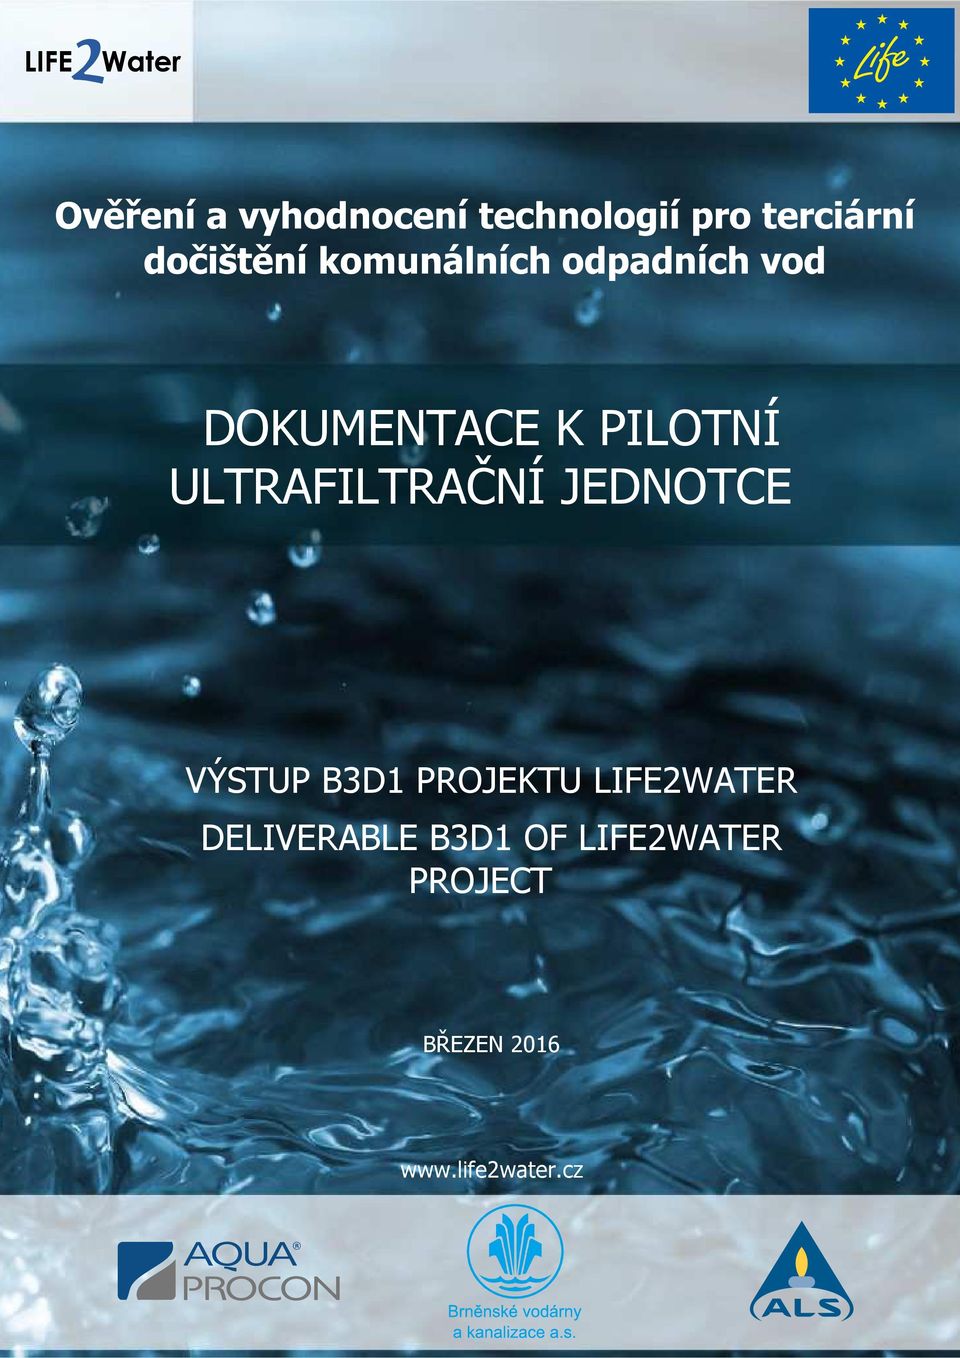 LIFE2WATER DELIVERABLE B3D1 OF